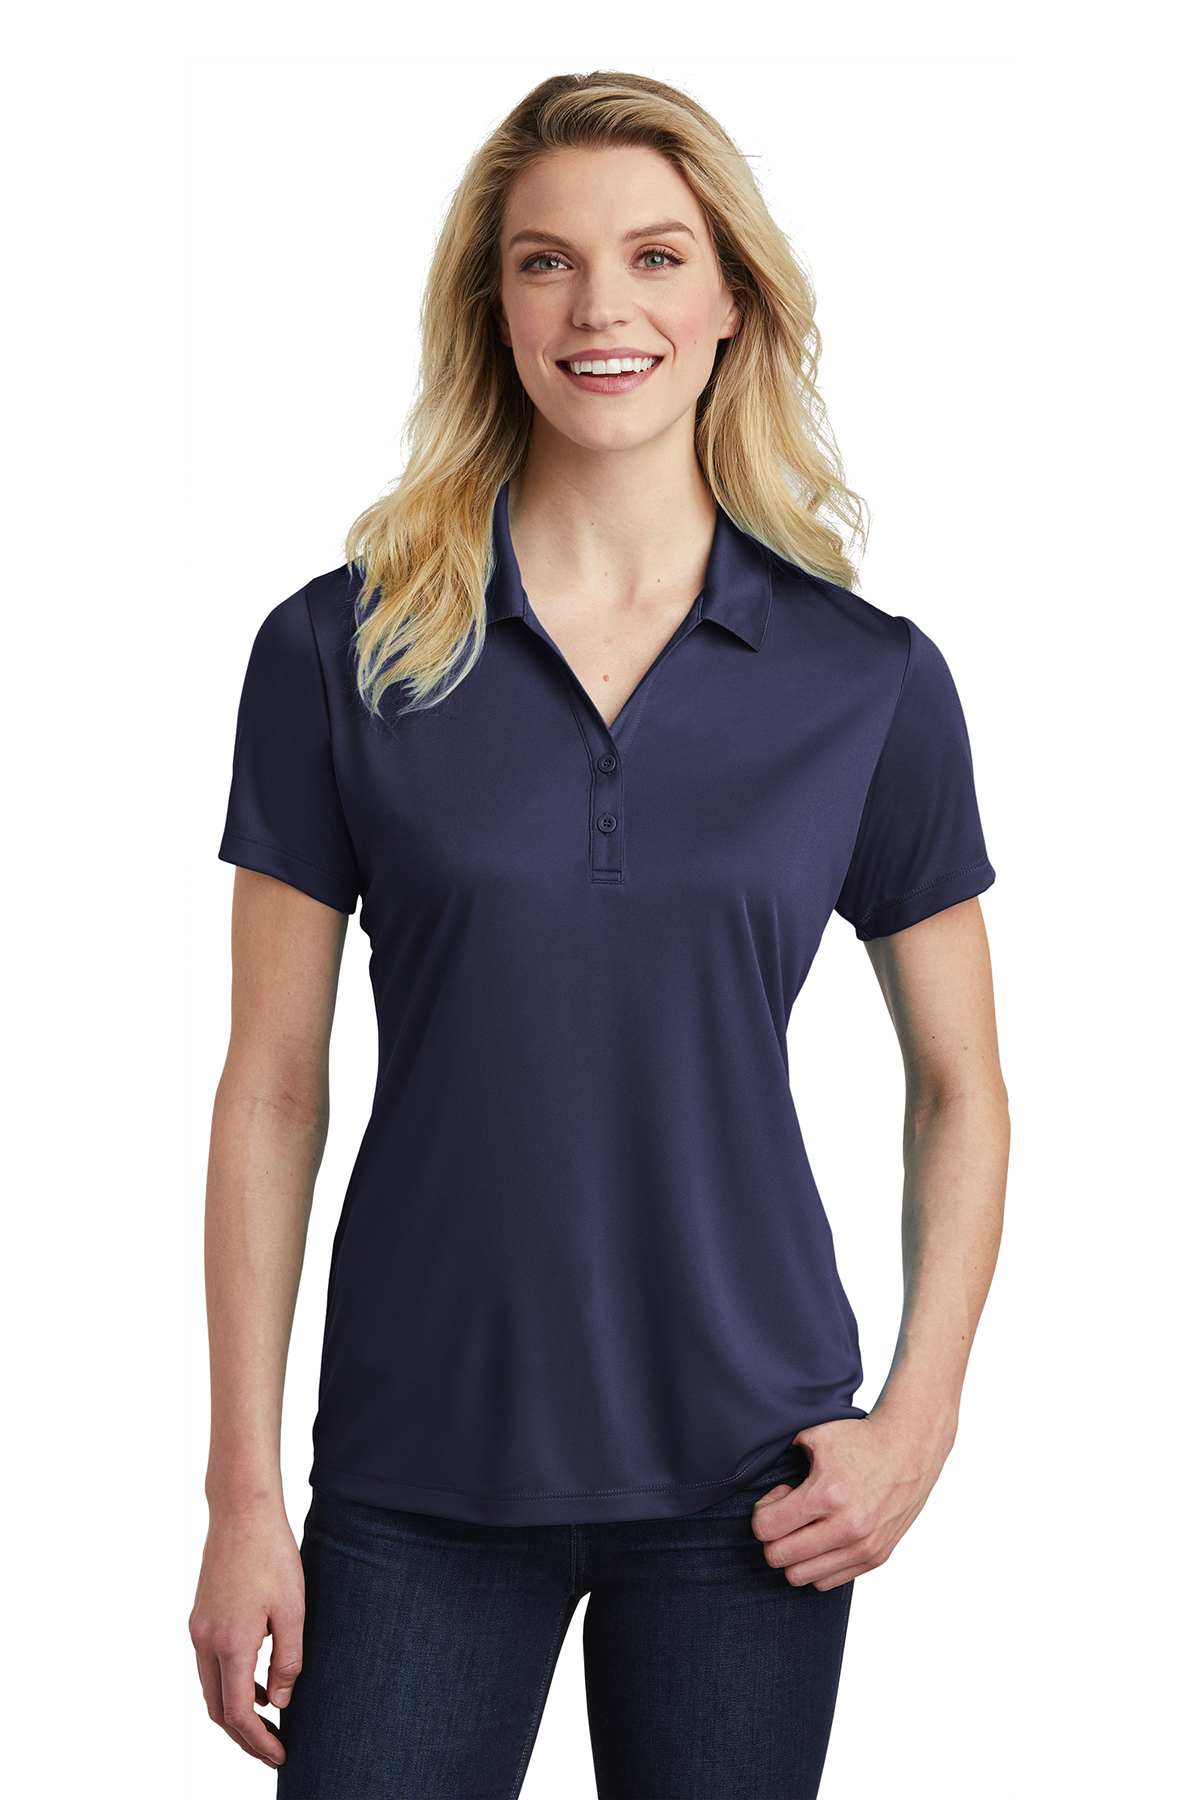 LST550 - Sport-Tek ® Ladies PosiCharge ® Competitor ™ Polo - GTX Awards